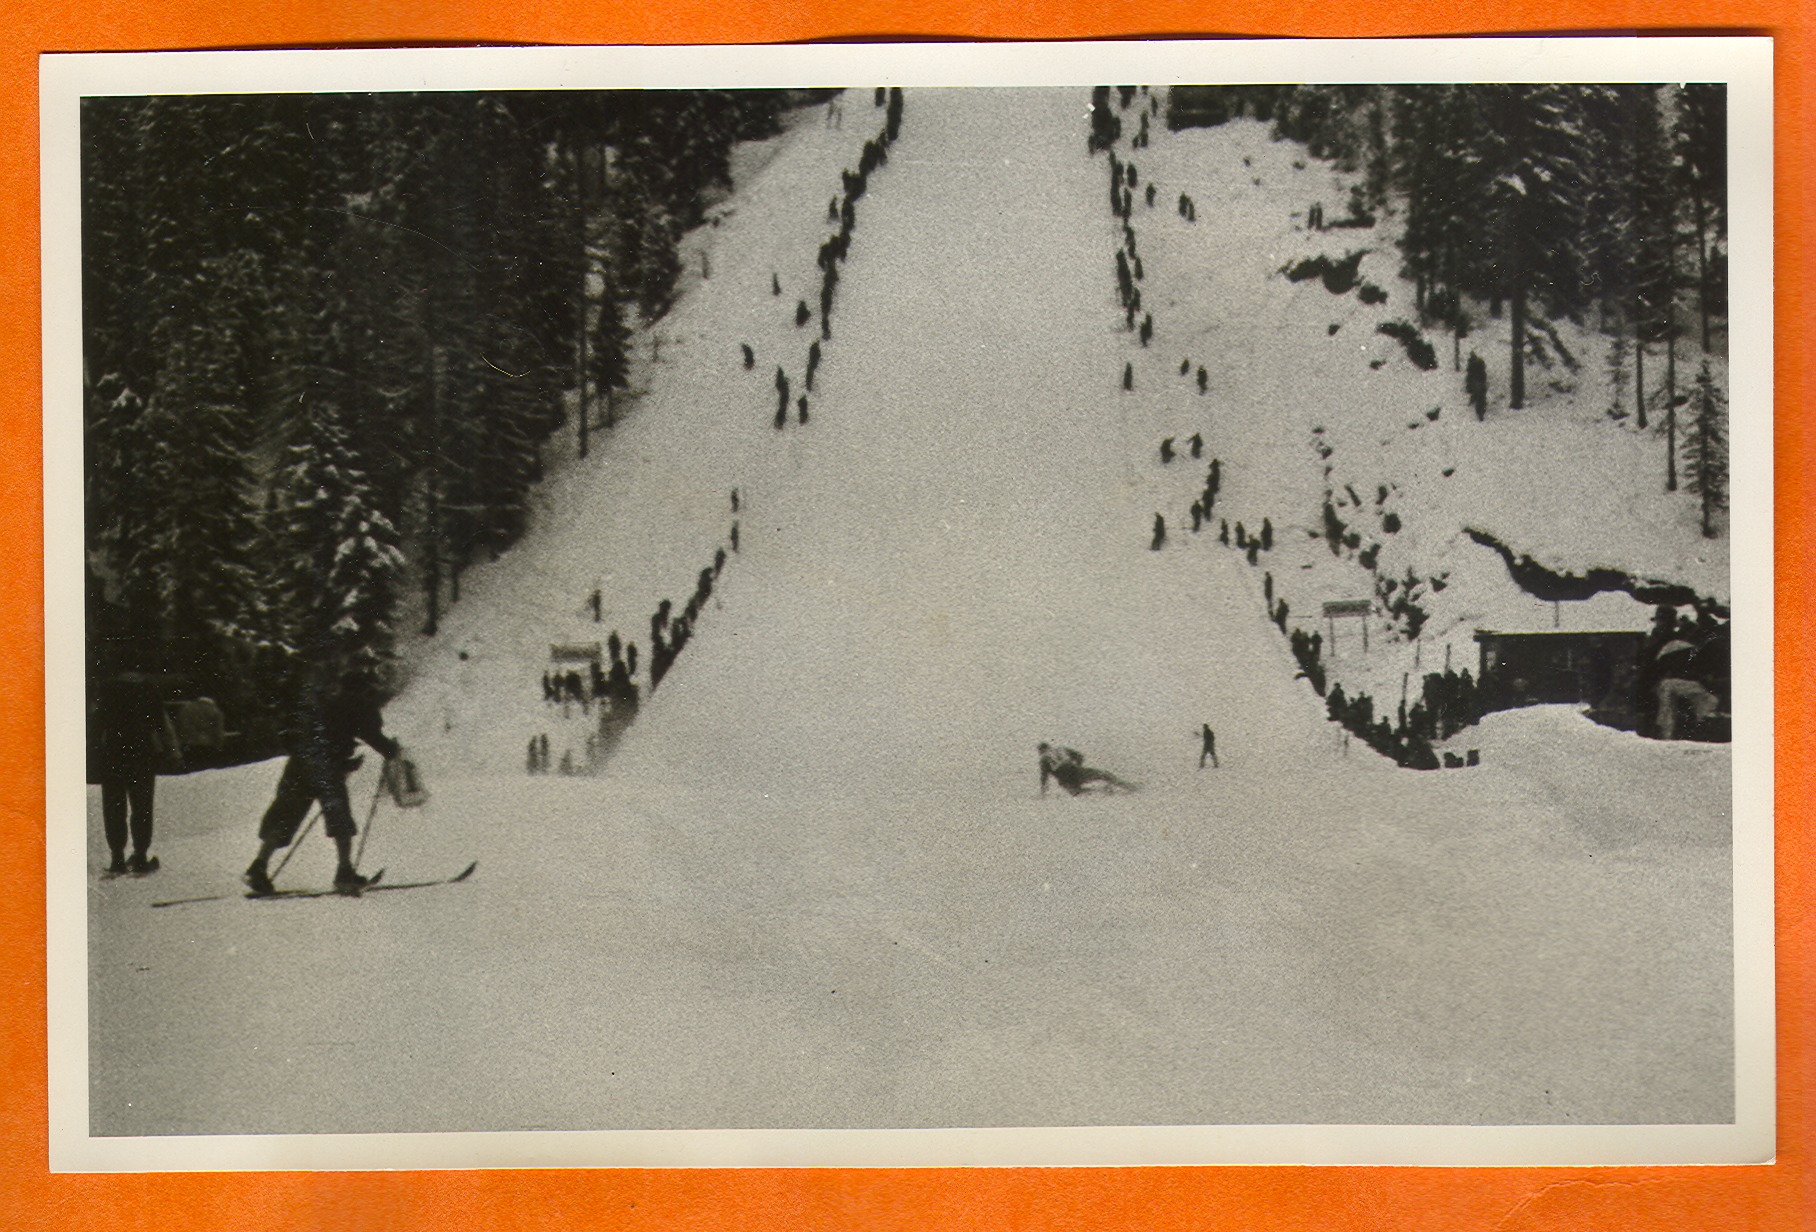 Skiers on a ski slope in Europe: photographic print